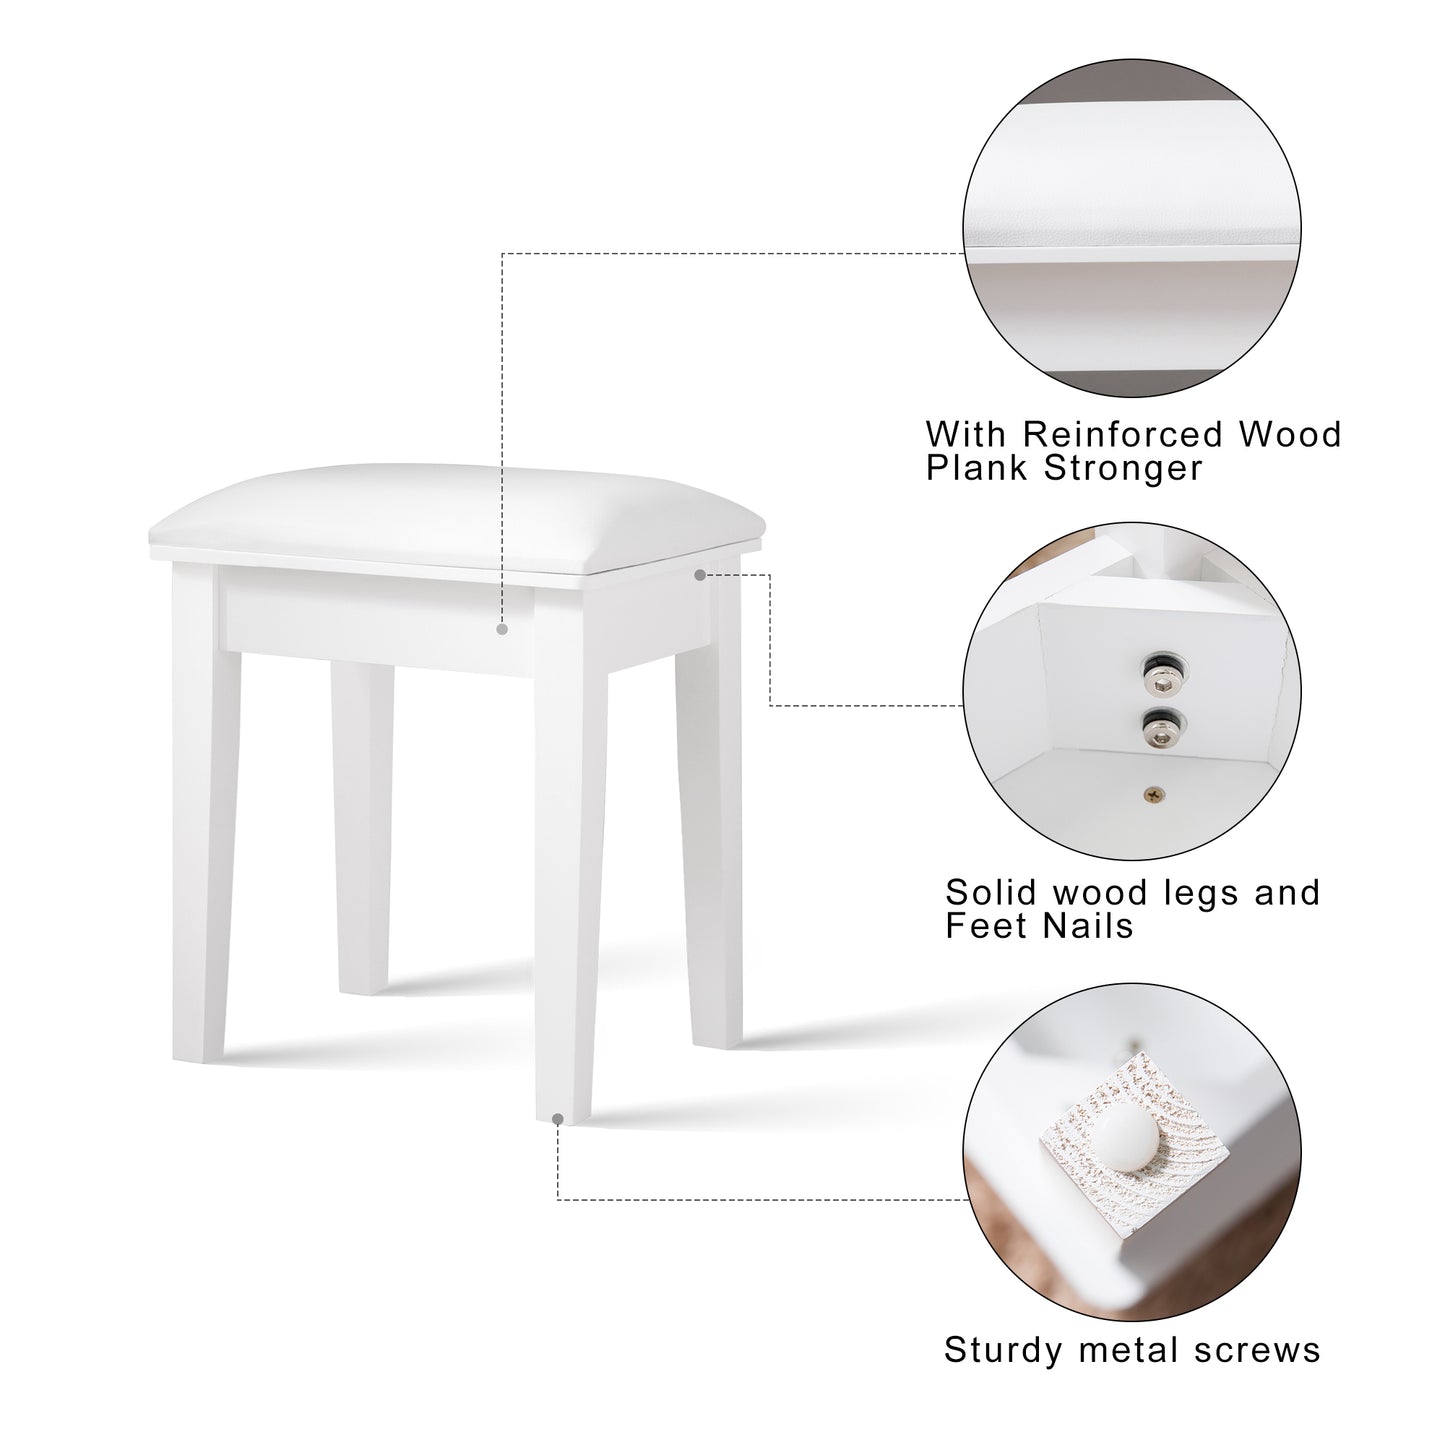 Accent White Vanity Table Set with Upholstered Stool and Flip-Top Mirror and 2 Drawers, Jewelry Storage for Women Dressing